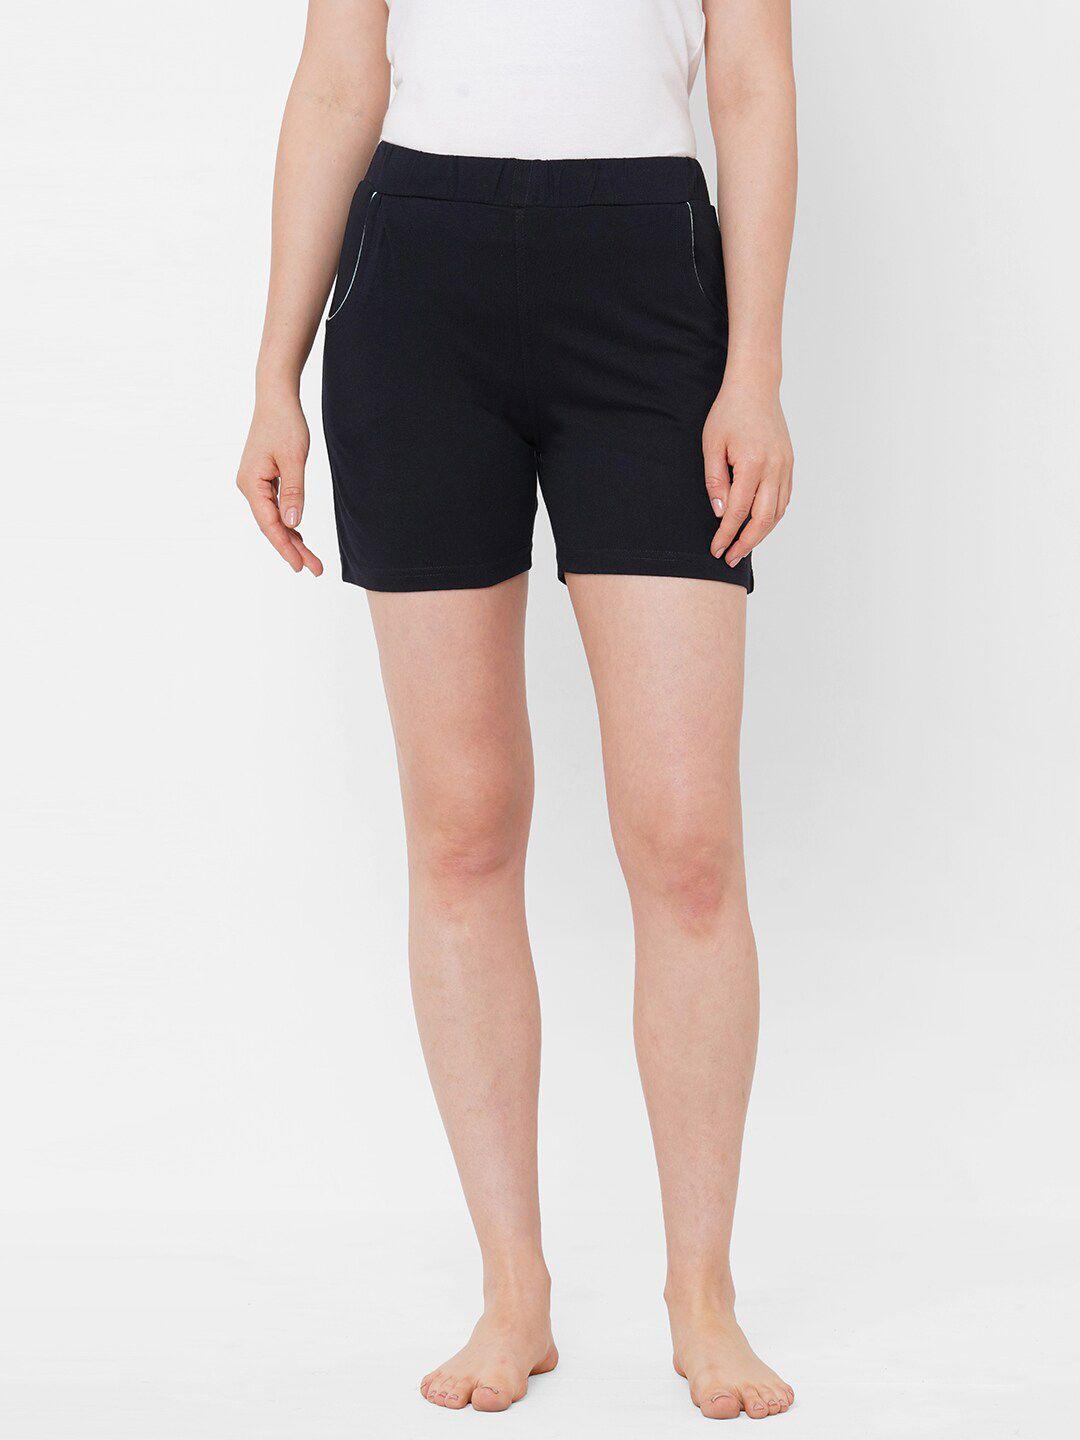 sweet-dreams-women-navy-blue-solid-mid-rise-cotton-lounge-shorts